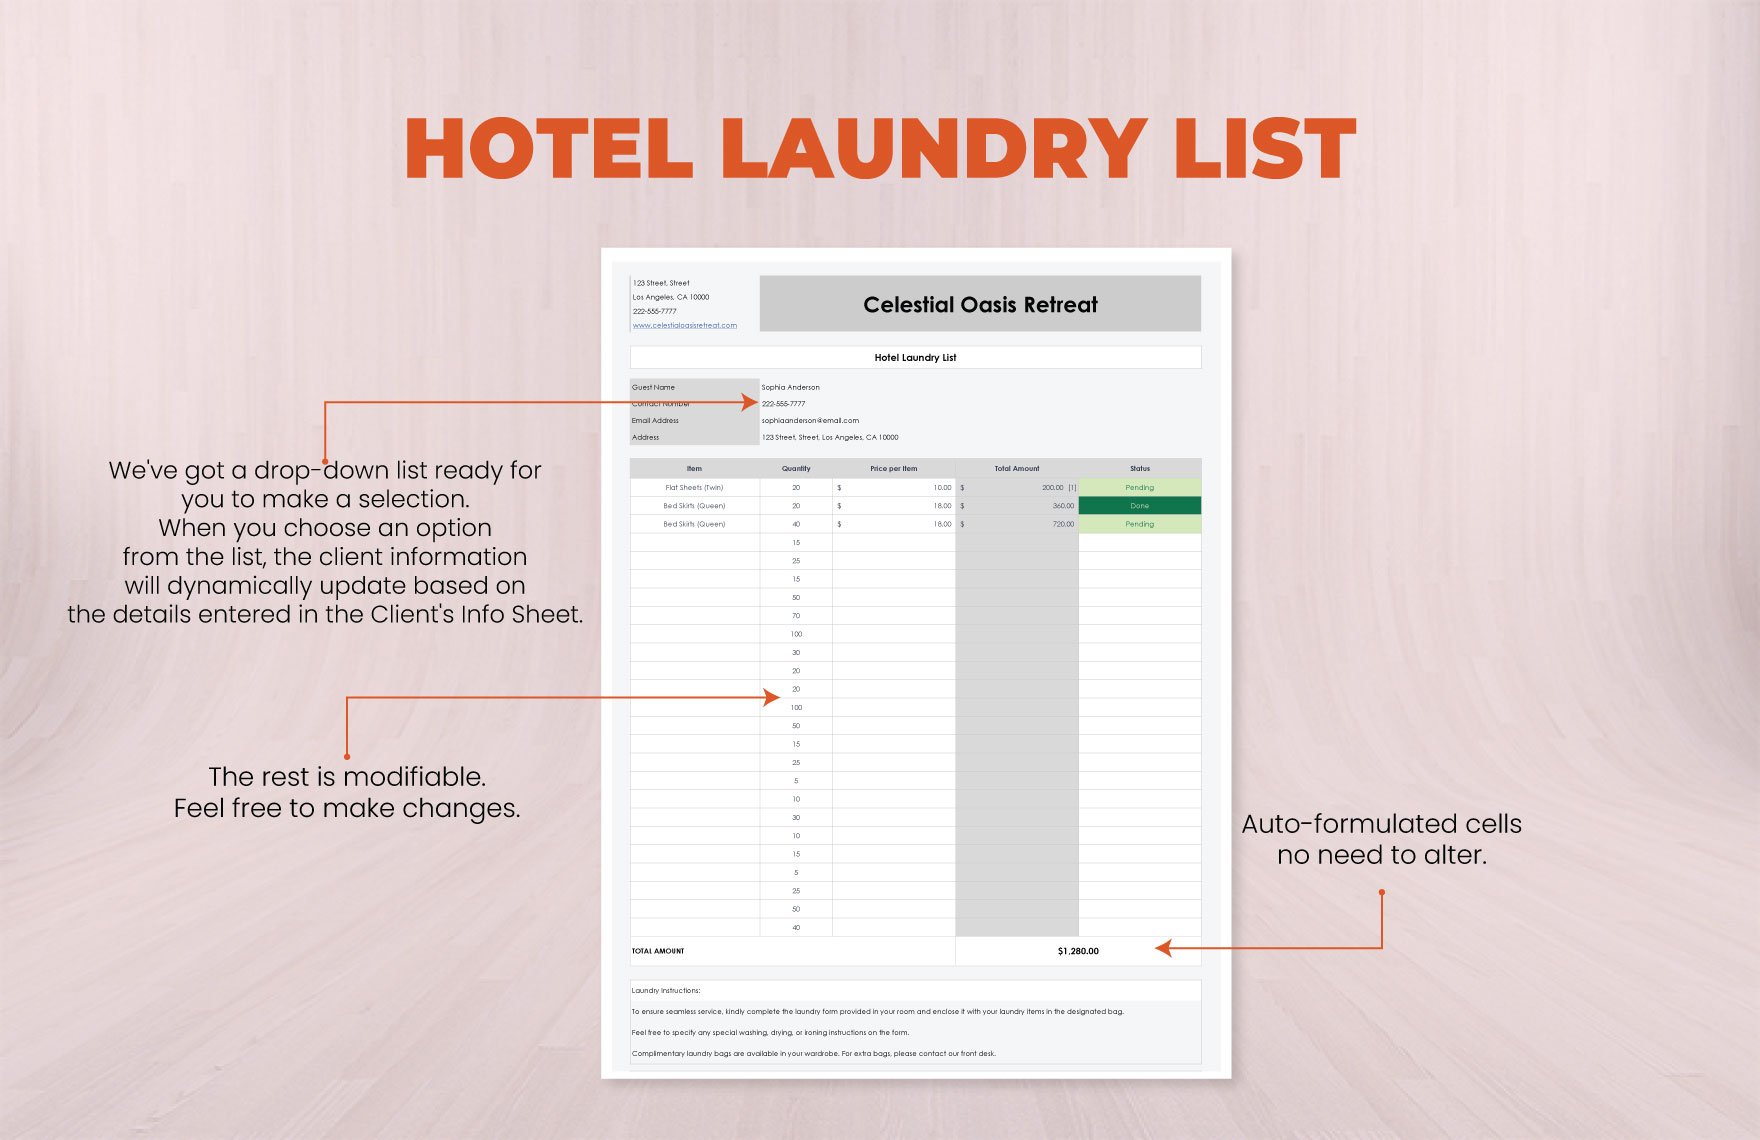 Hotel Laundry List Template